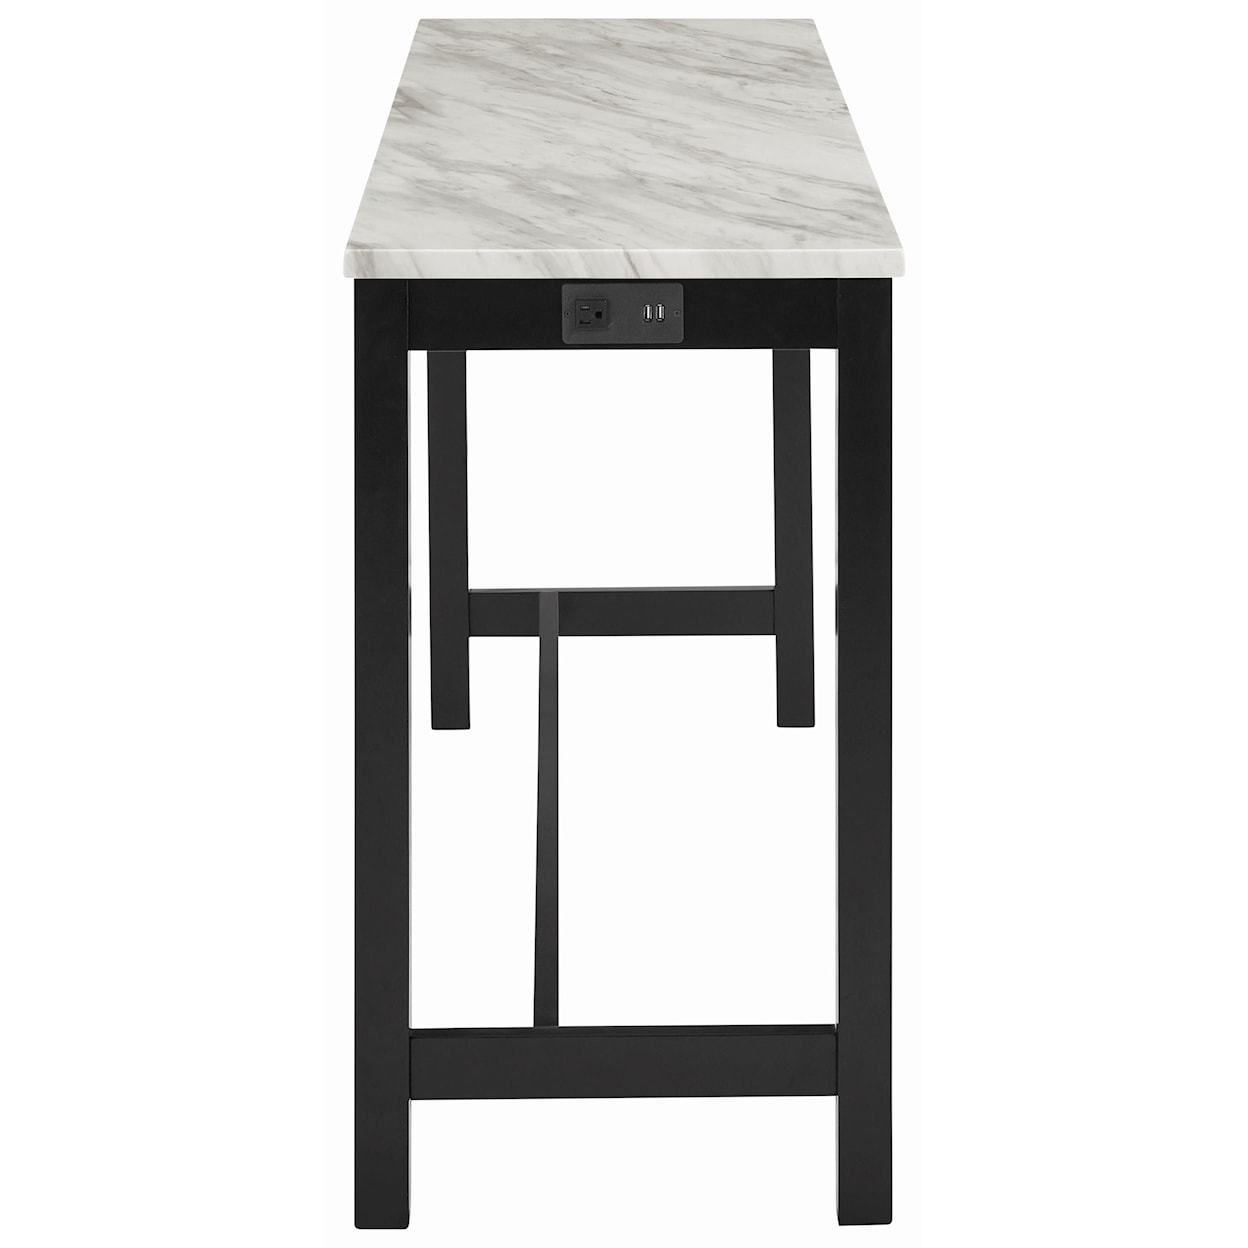 New Classic Furniture Celeste Theater Bar Table W/ 3 Stools